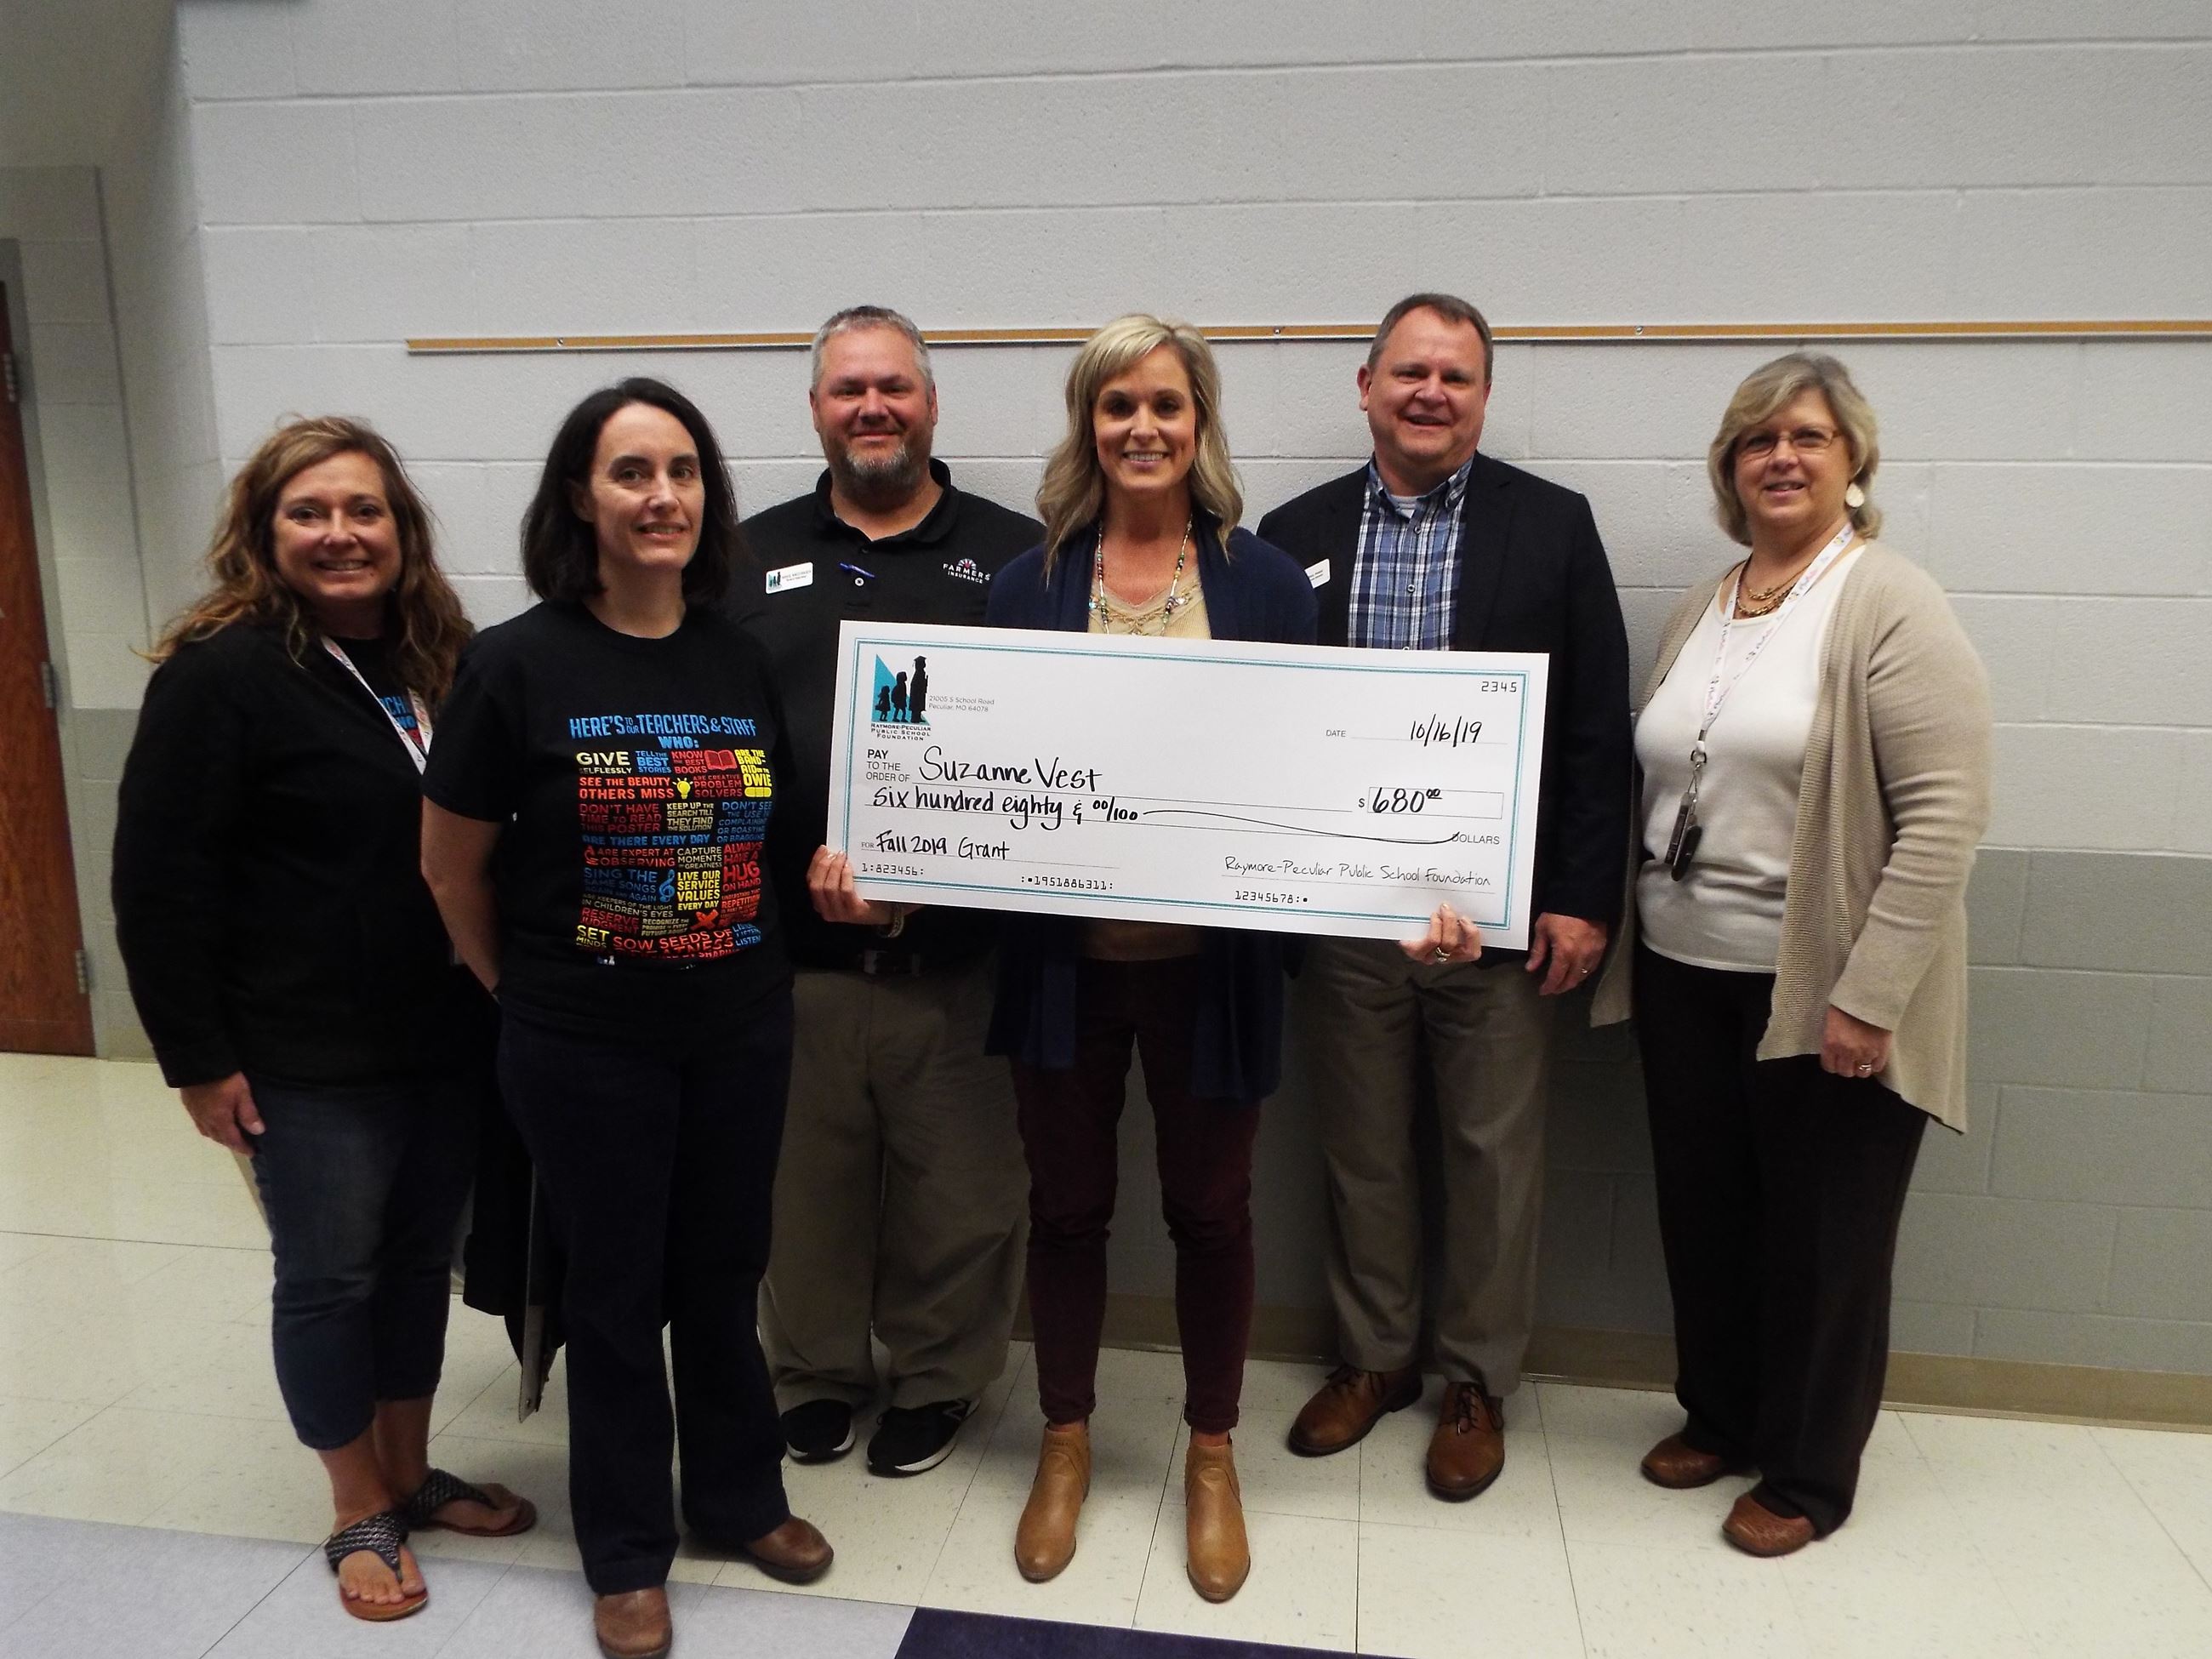 Eagle Glen Reading Interventionist Suzanne Vest received a $680 grant to purchase leveled literature sets for the K-2 grade levels.